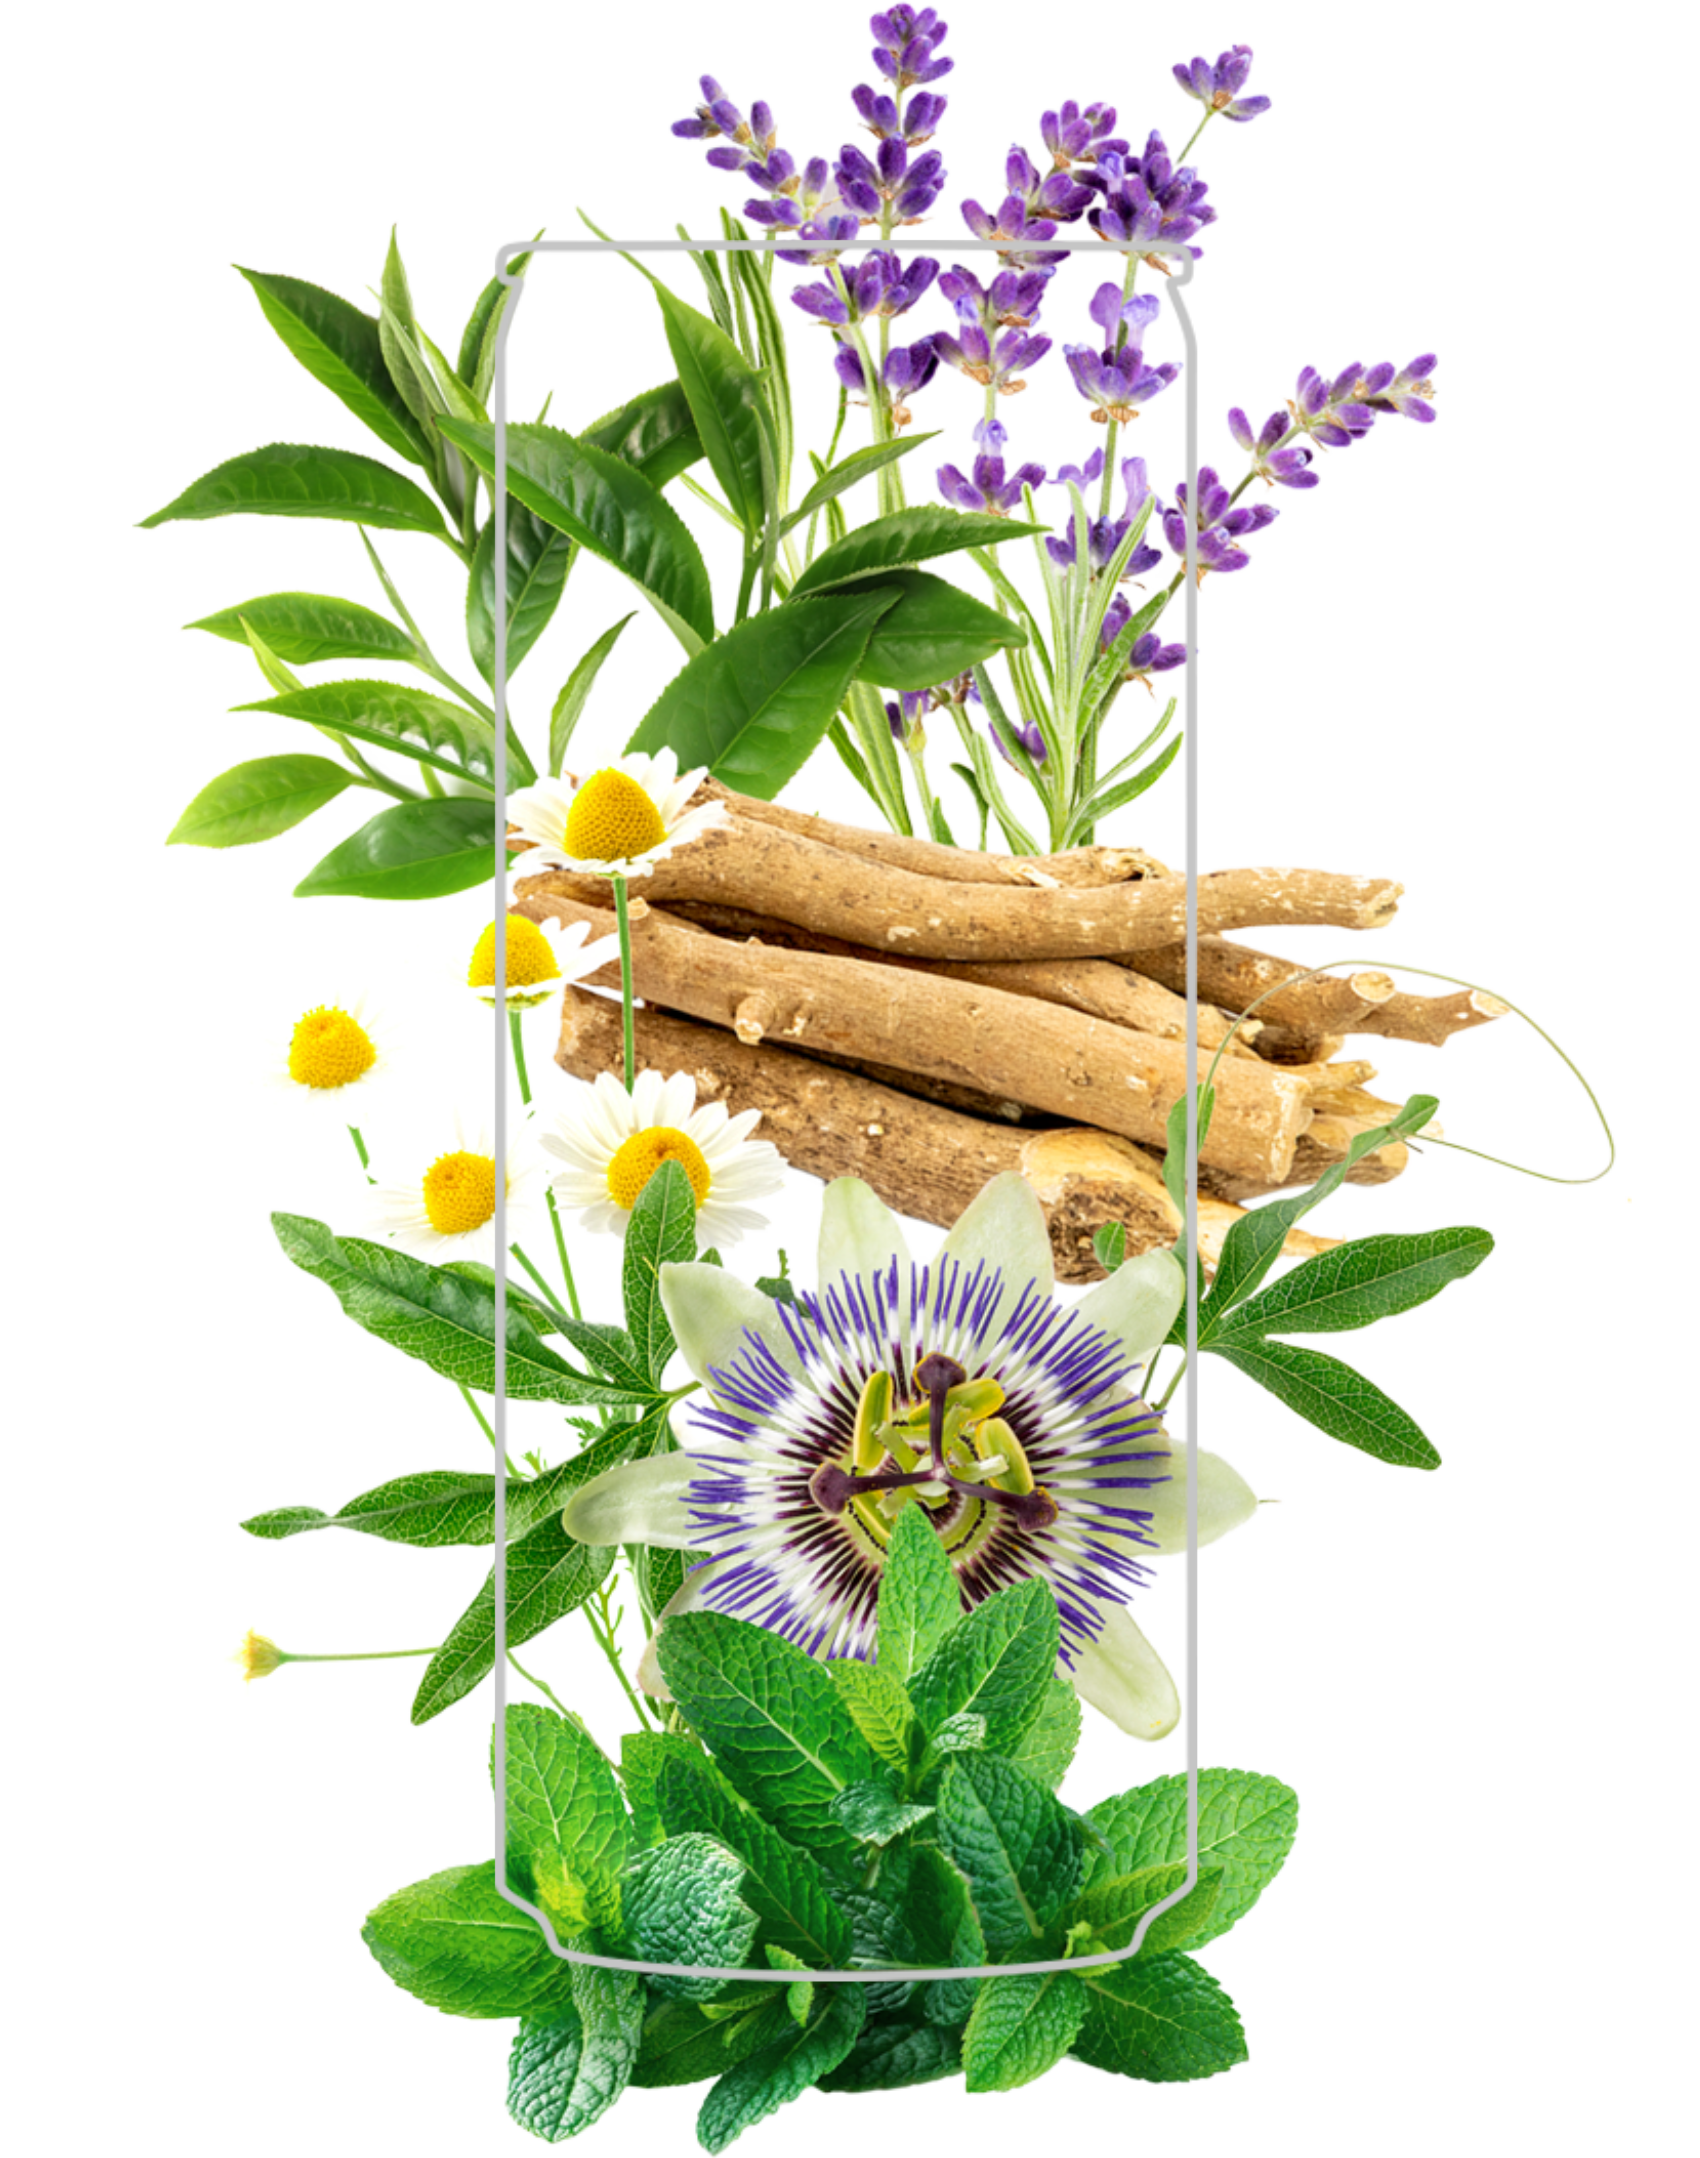 An arrangement of various medicinal plants including aloe vera, chamomile flowers, lavender, and some brown roots displayed creatively, forming a visually appealing collage. The vibrant green, purple, and white colors of the wellness plants contrast with the earthy tones of the roots.